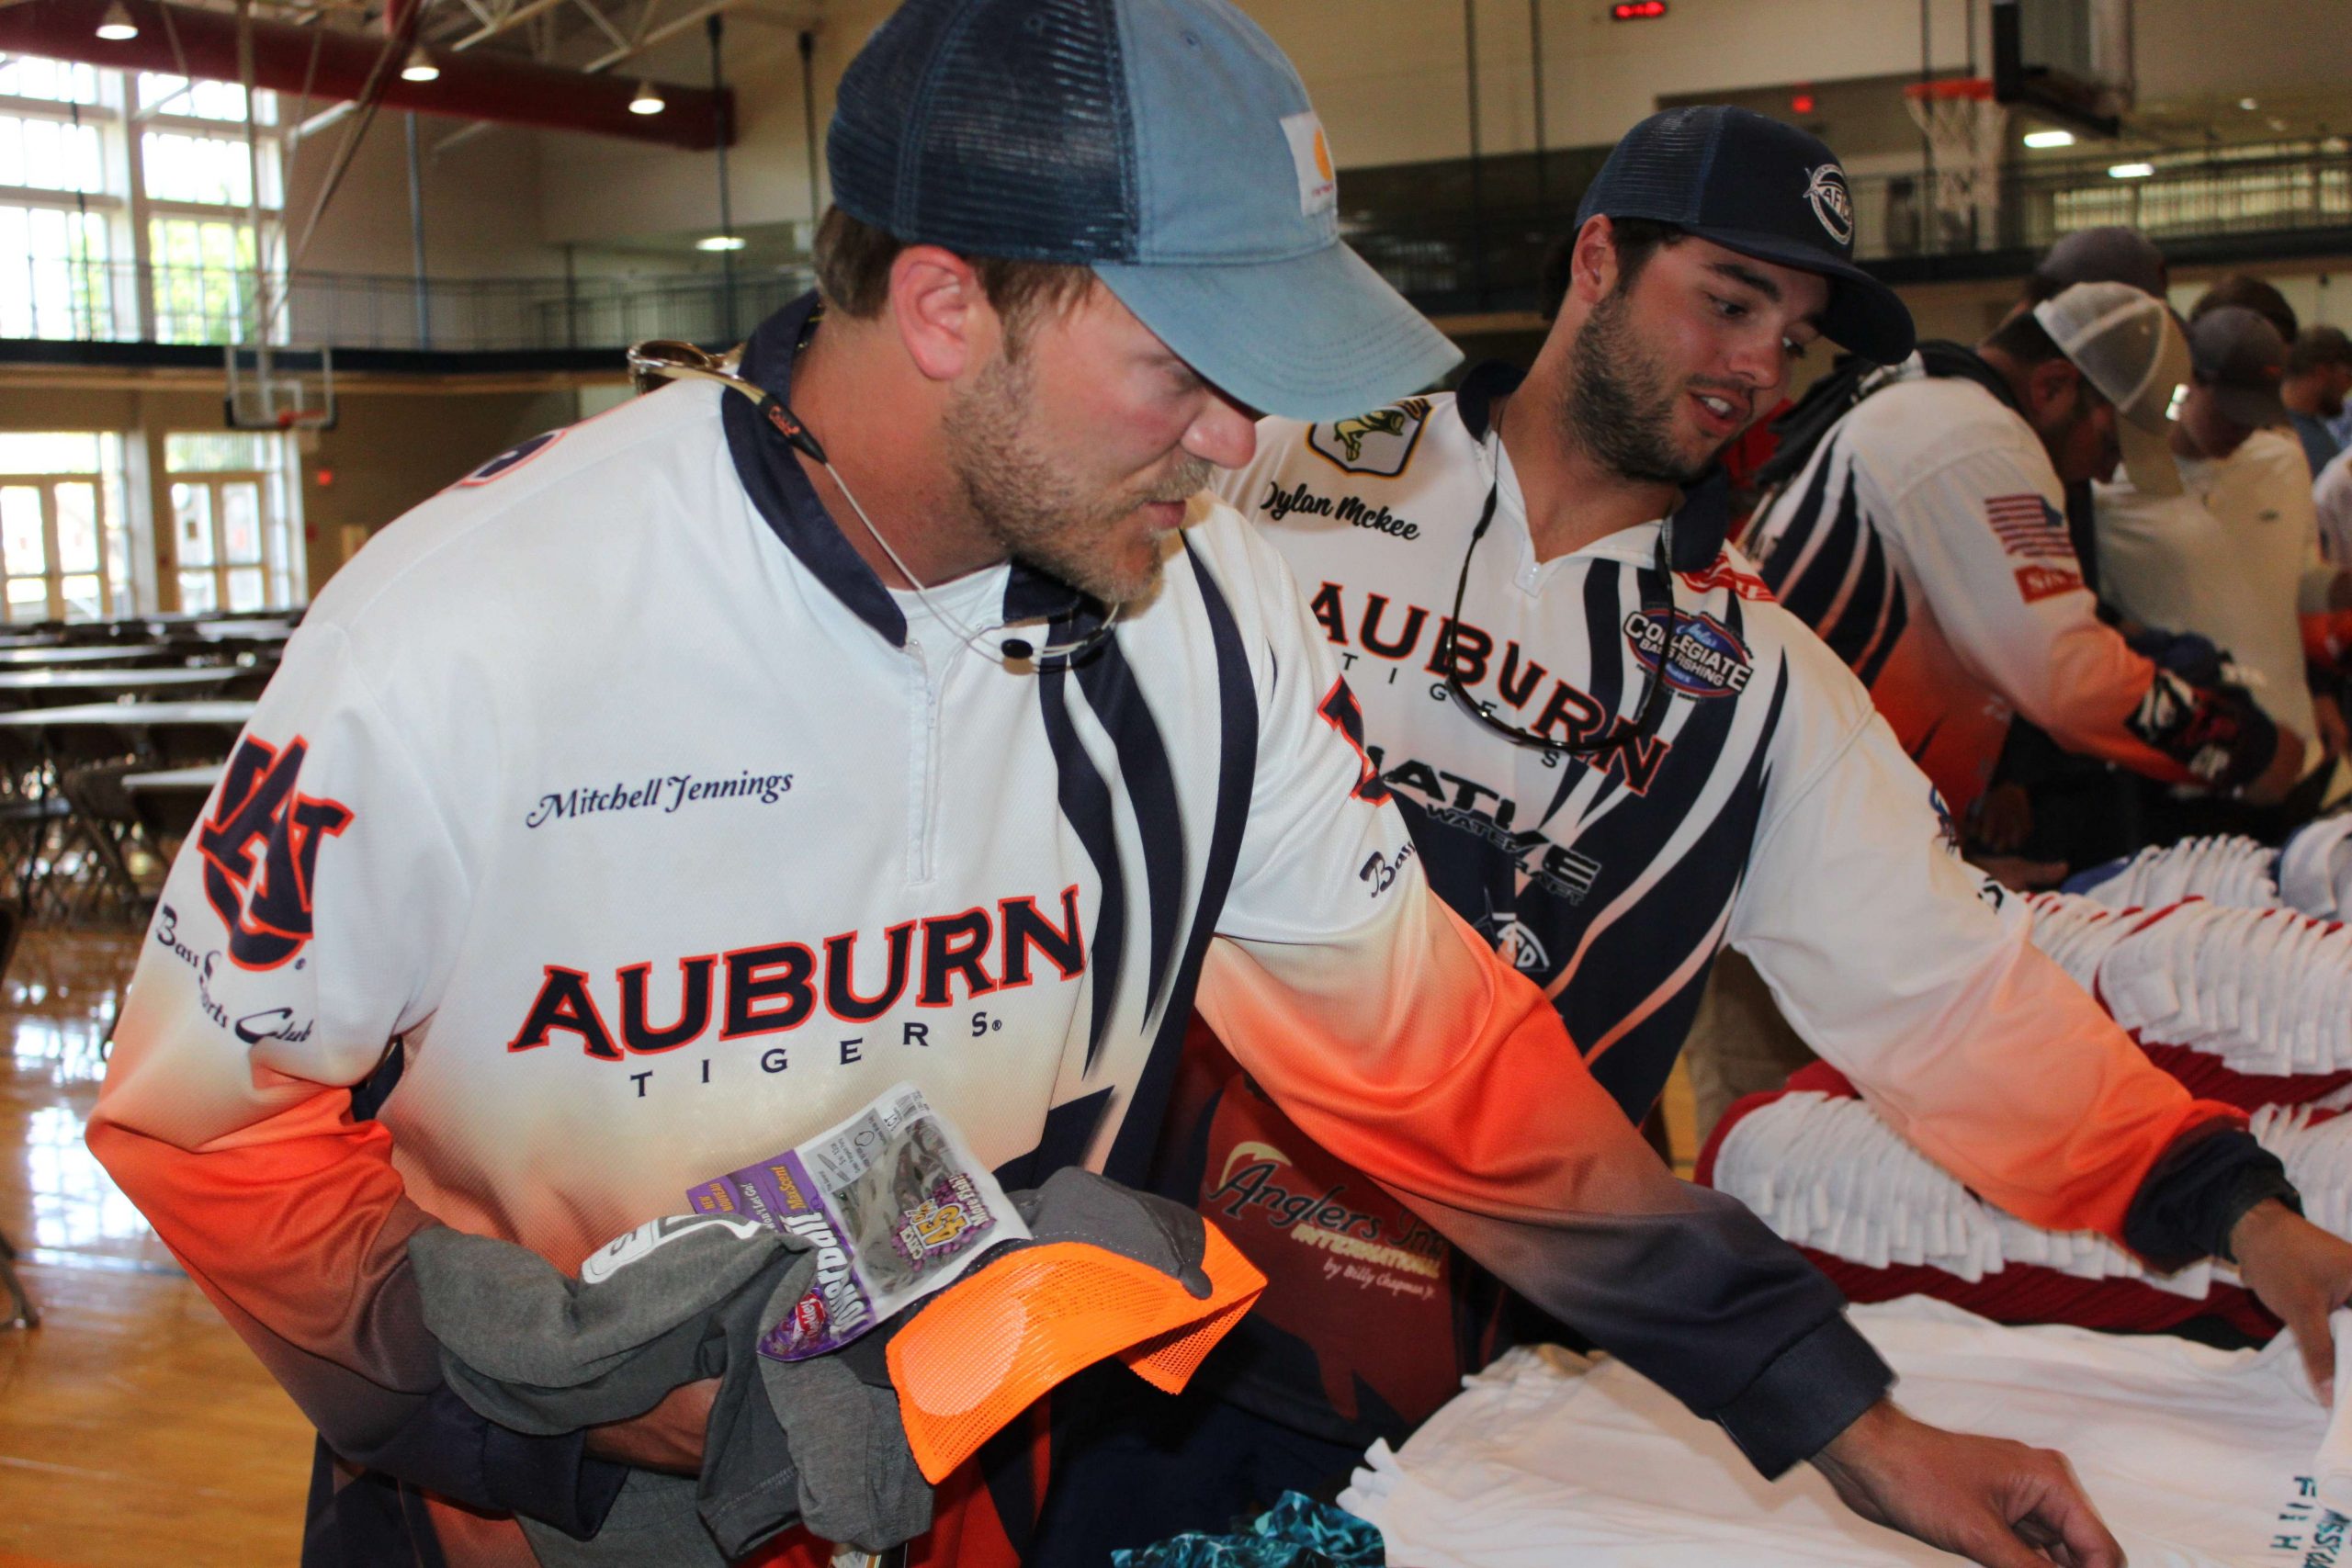 These Auburn University anglers also go for Mossy Oak gear.